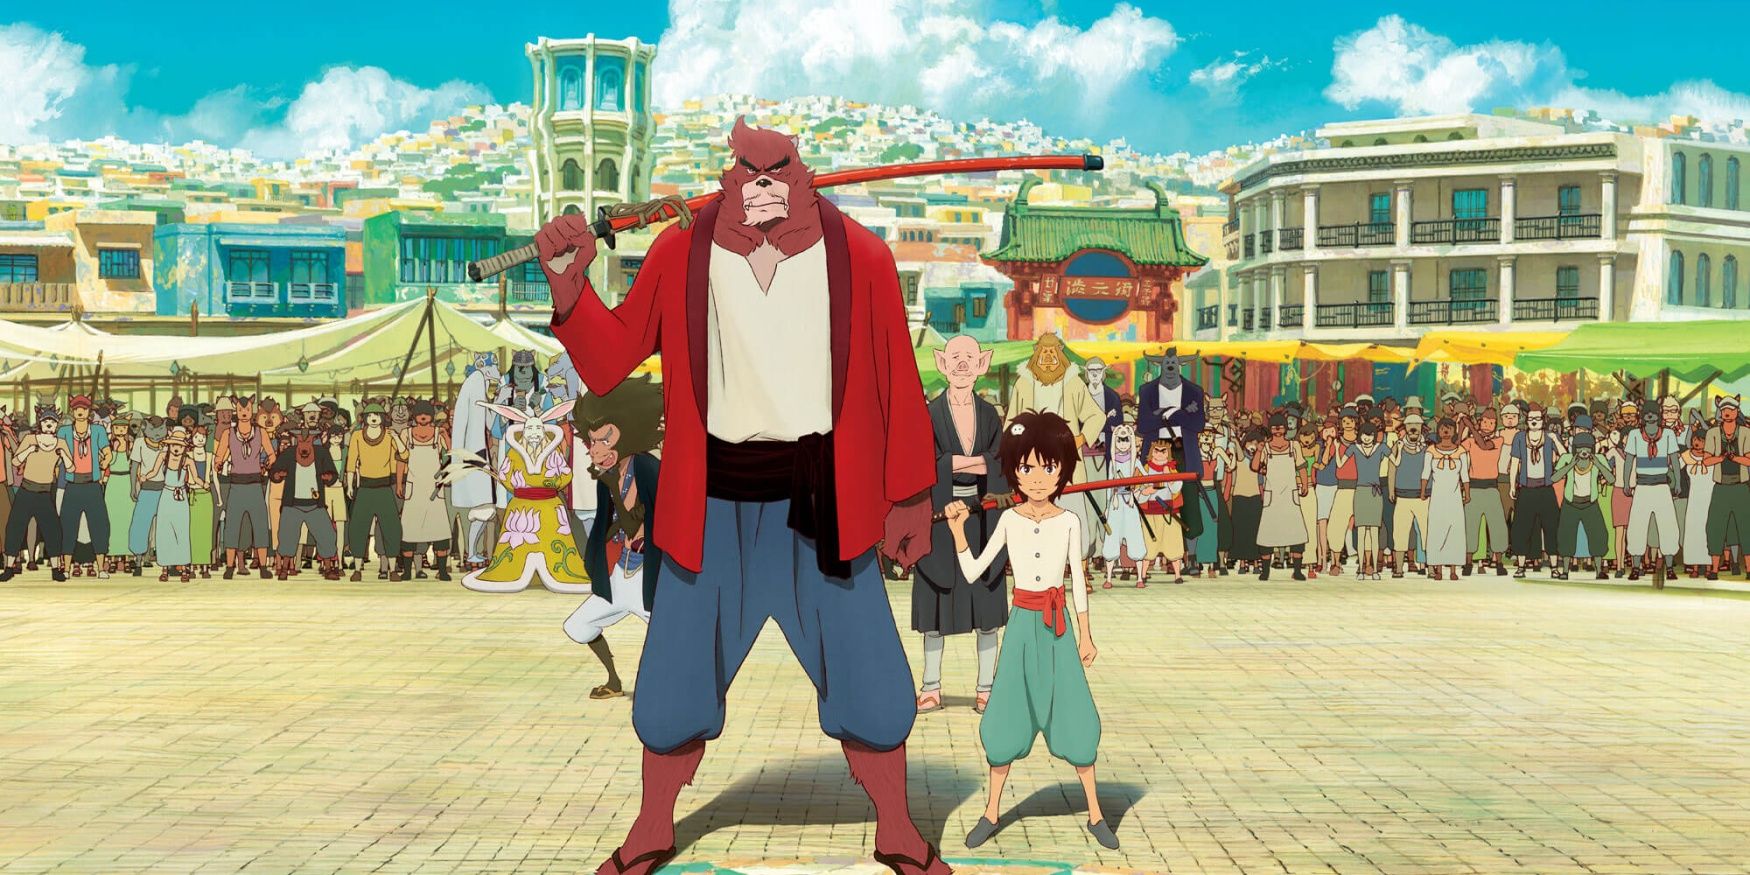 A fox-like creature and a young boy hold samurai swords in the The Boy and the Beast anime